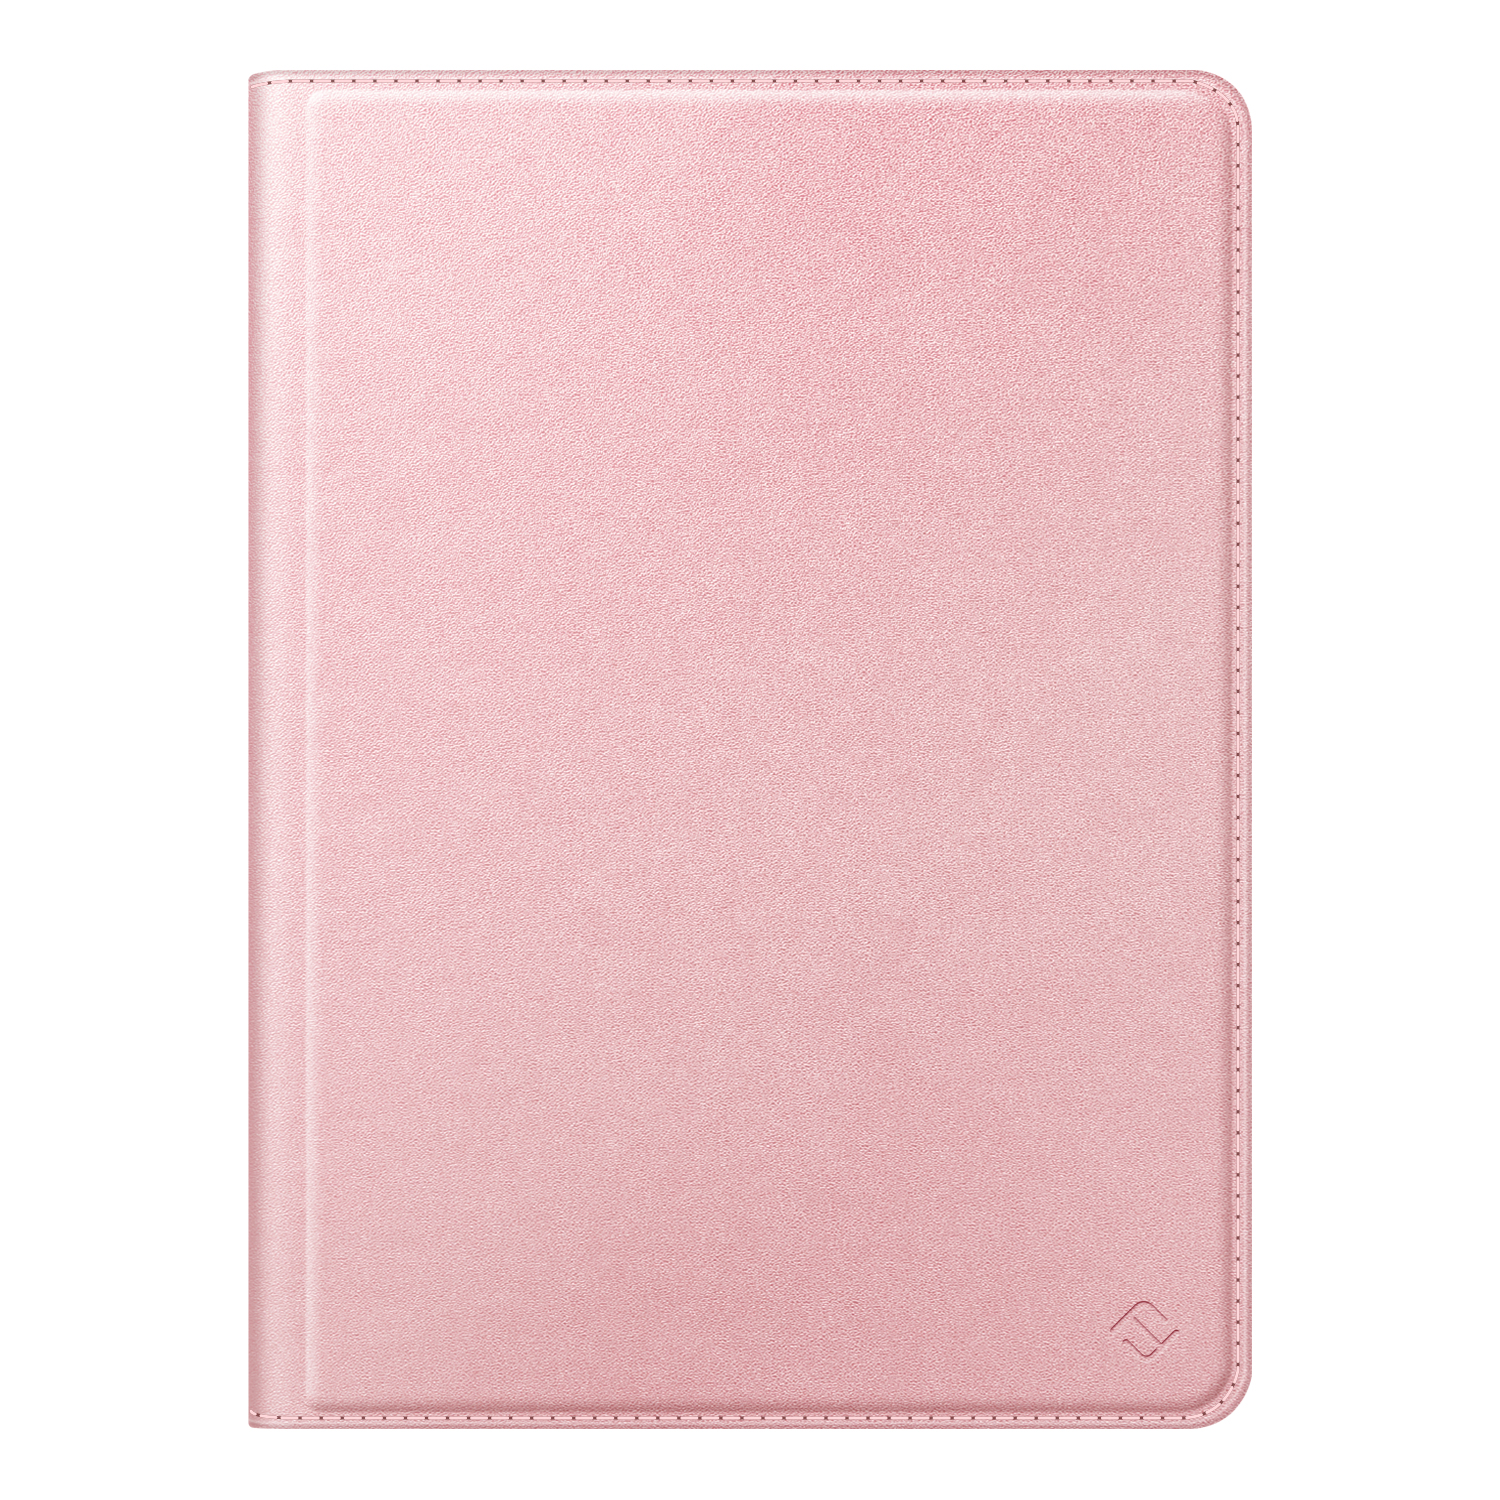 FINTIE Hülle, Bookcover, 7 / und Apple, Modell (8. Roségold 10.2 Zoll 2020 2019), Generation, iPad